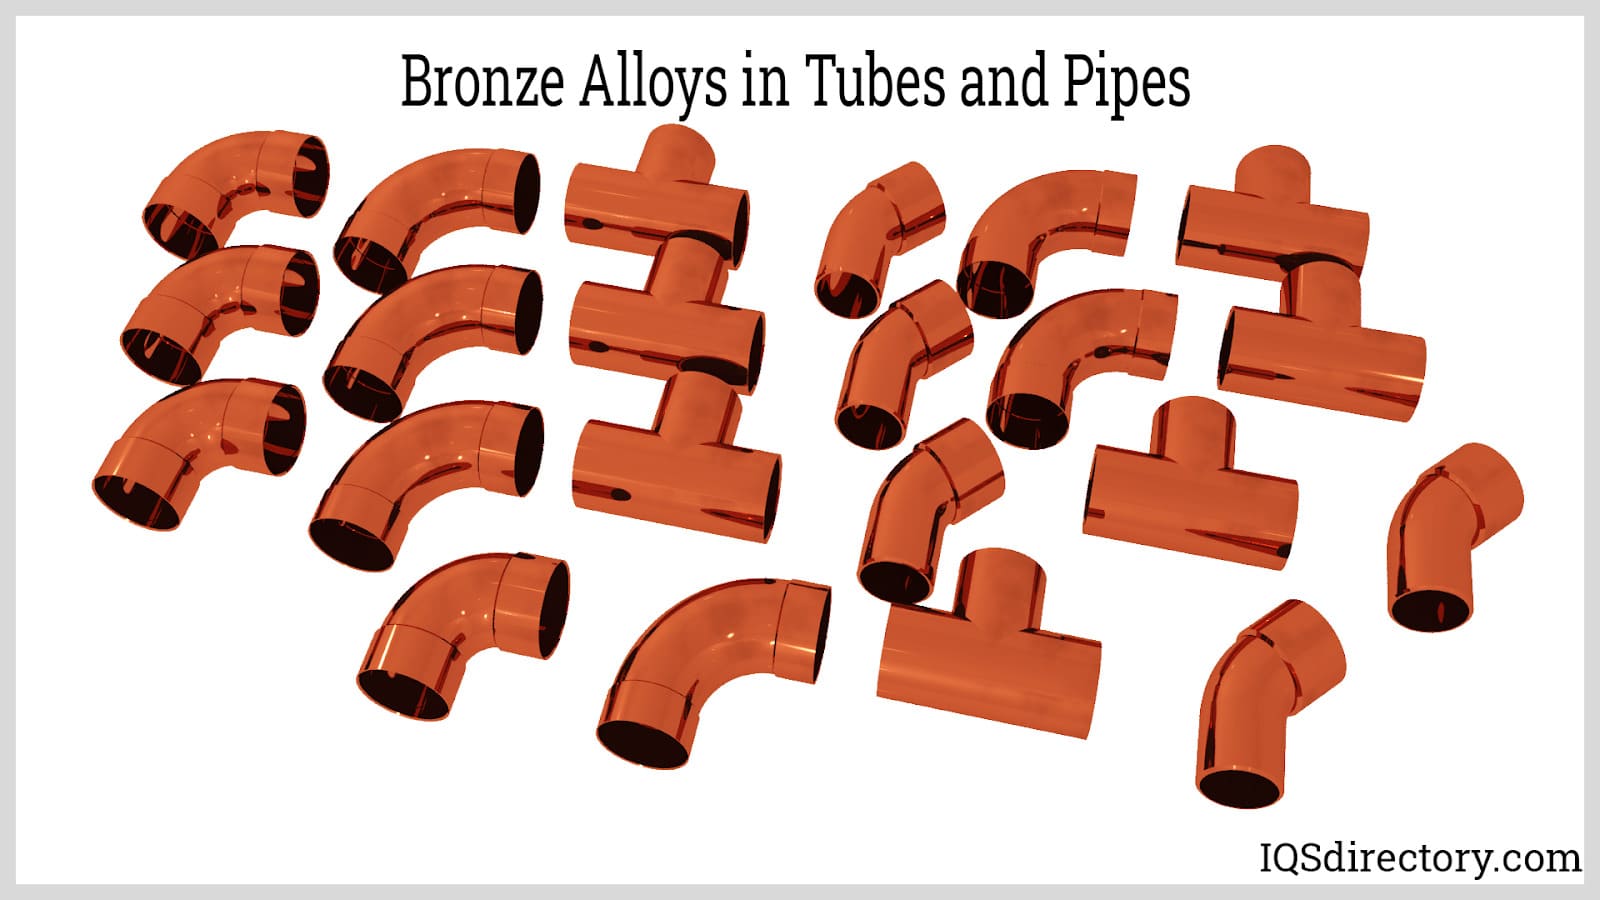 Bronze Alloys in Tubes and Pipes